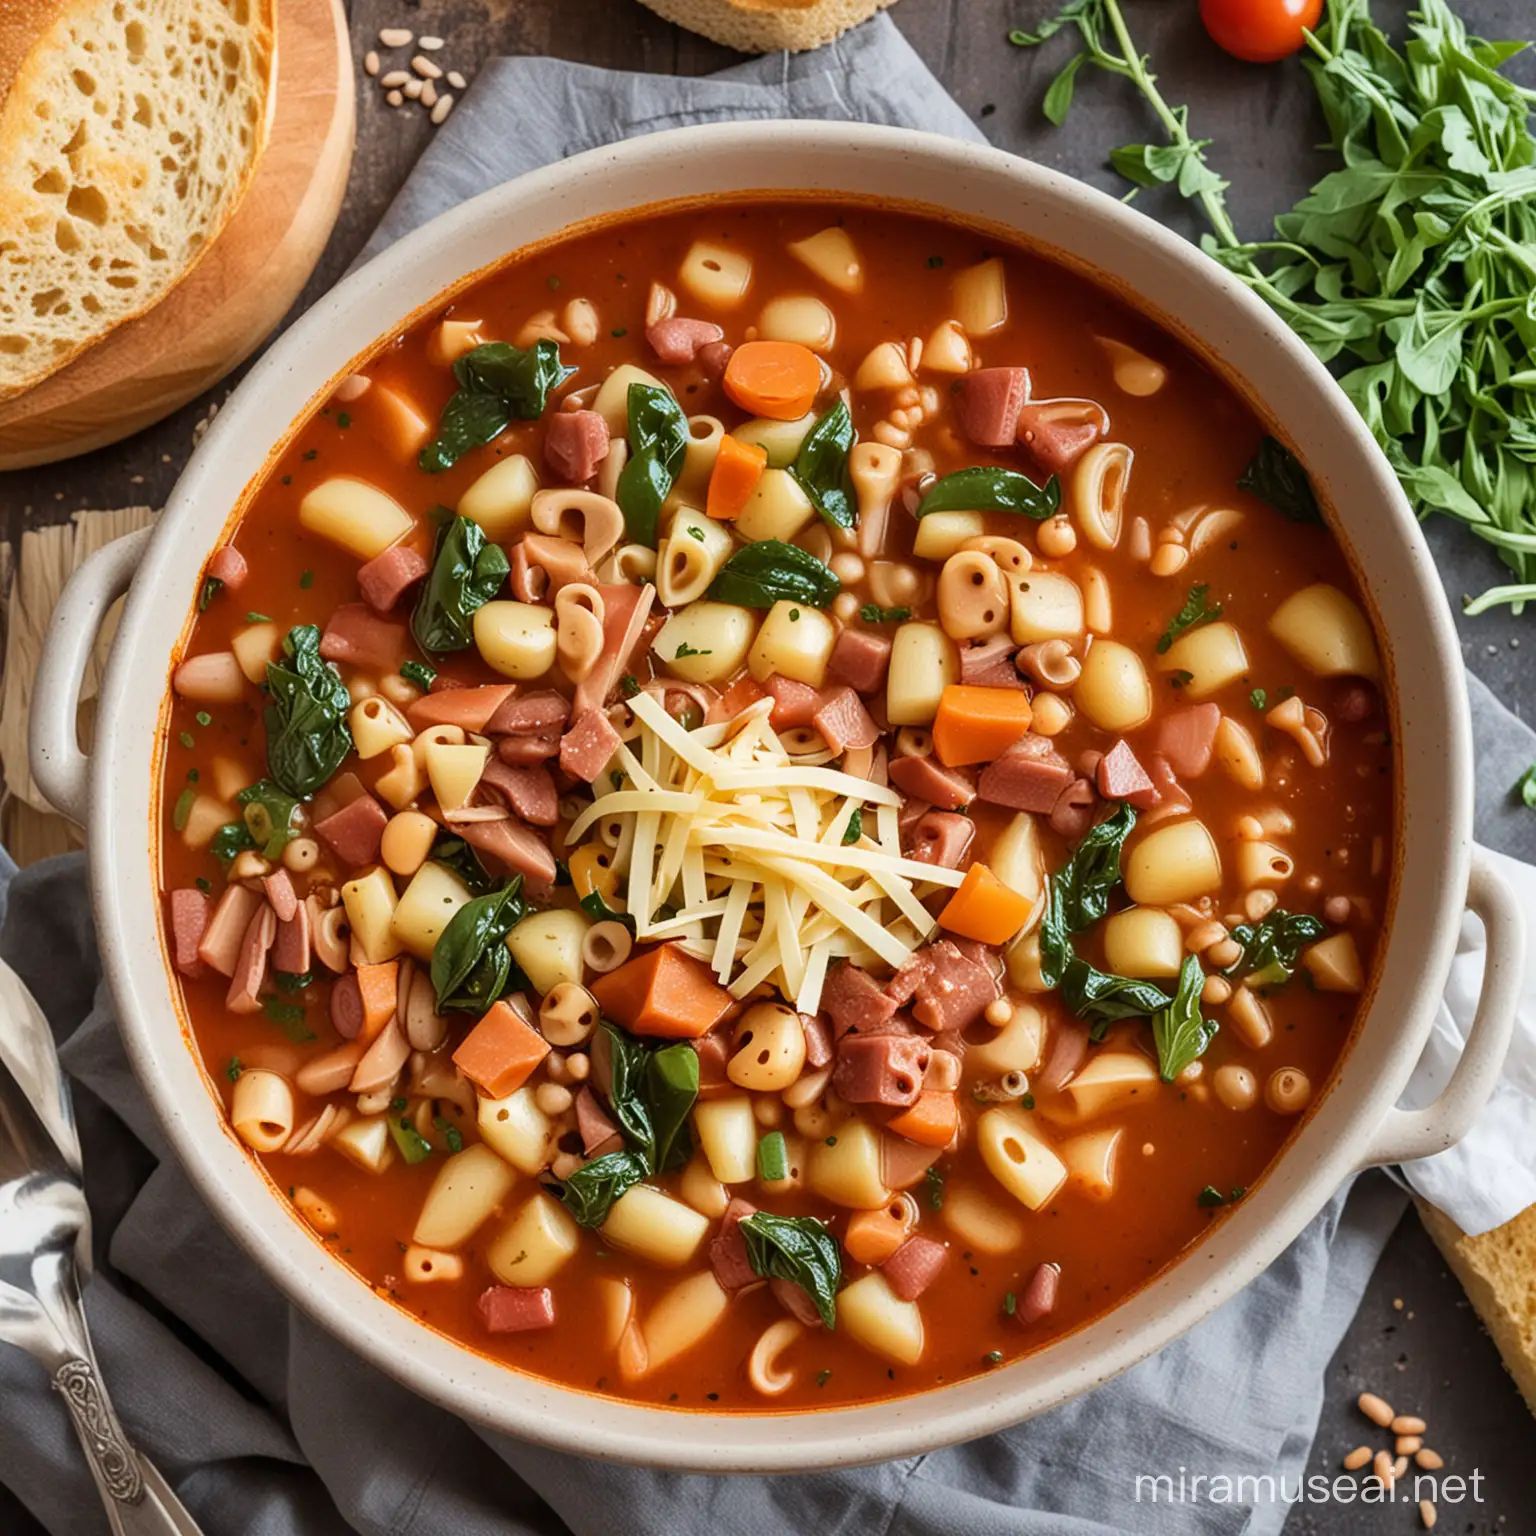 Hearty Minestrone Soup Recipe with Fresh Vegetables and Beans